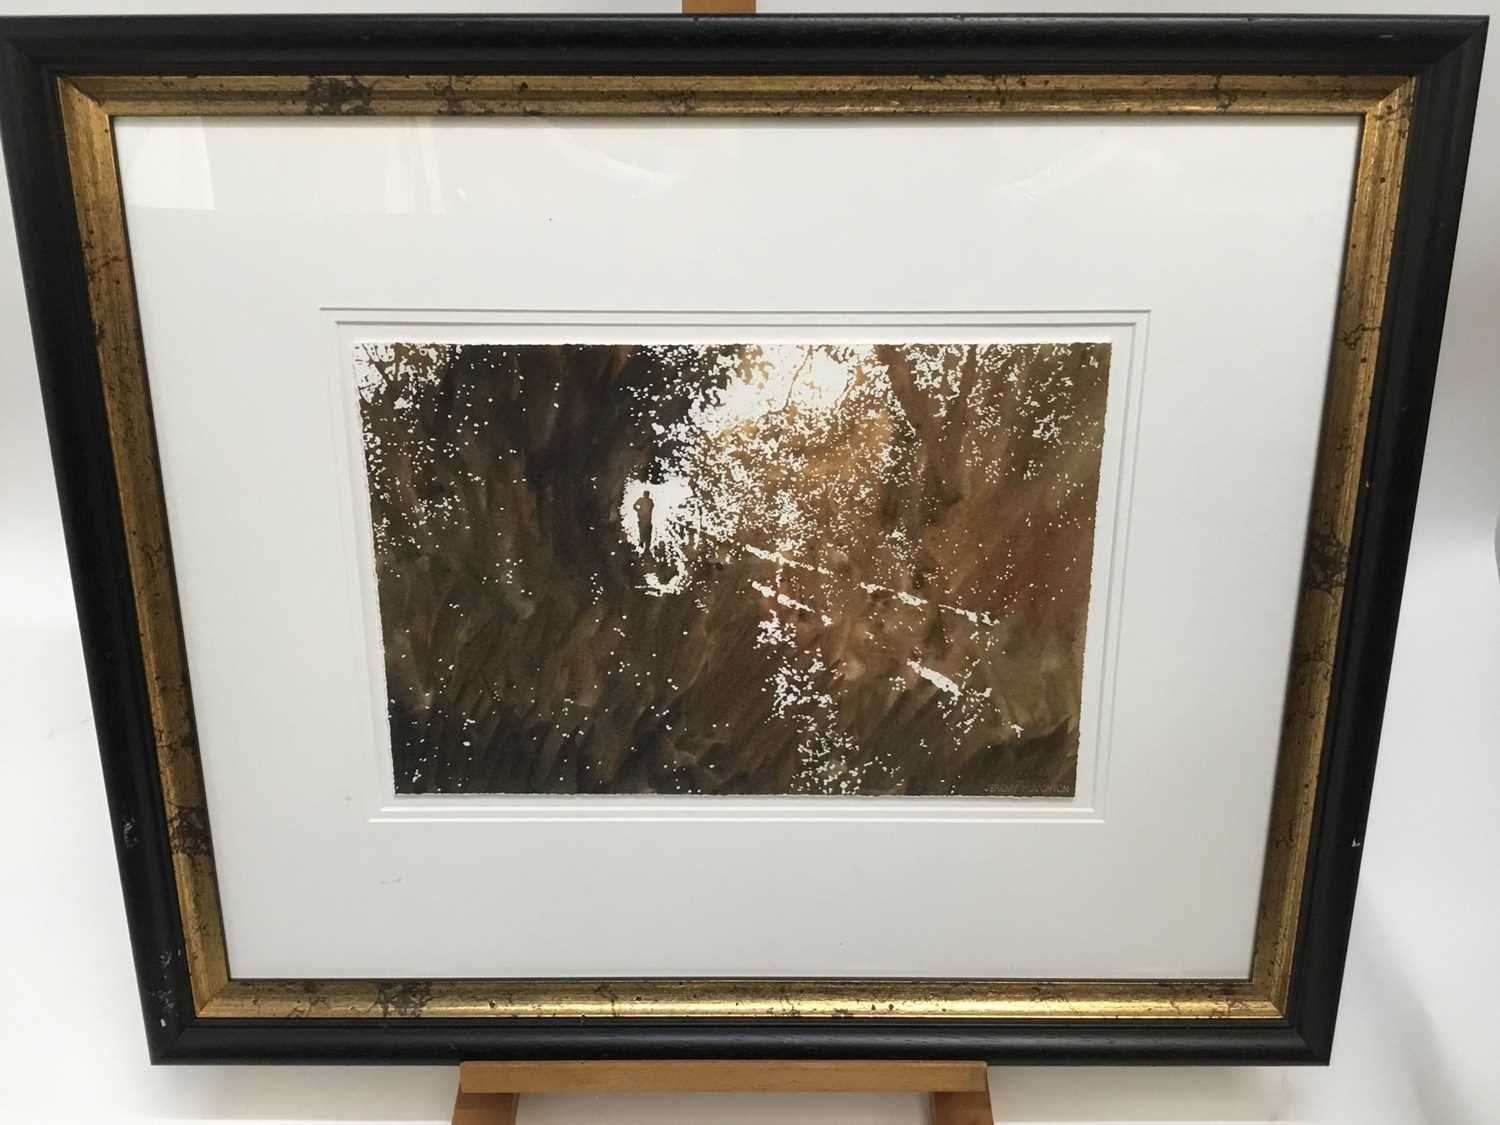 Lot 11 - Jeremy Houghton, contemporary, watercolour - figure in landscape, signed and dated '09, in glazed gilt and ebonised frame